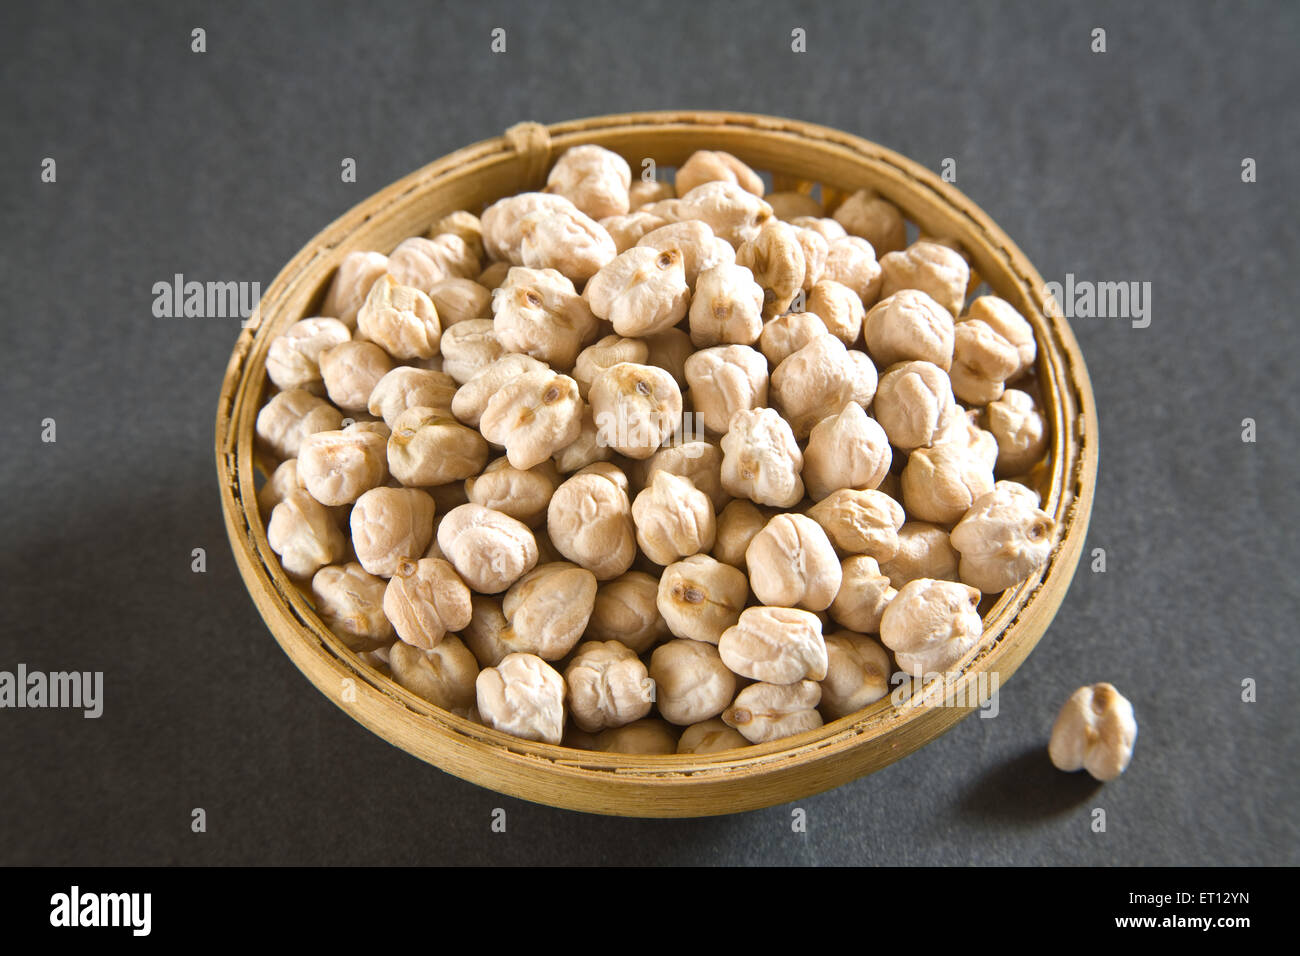 Grain ; chickpeas gram cicer arietinum in cane bowl on grey background 19 May 2010 Stock Photo